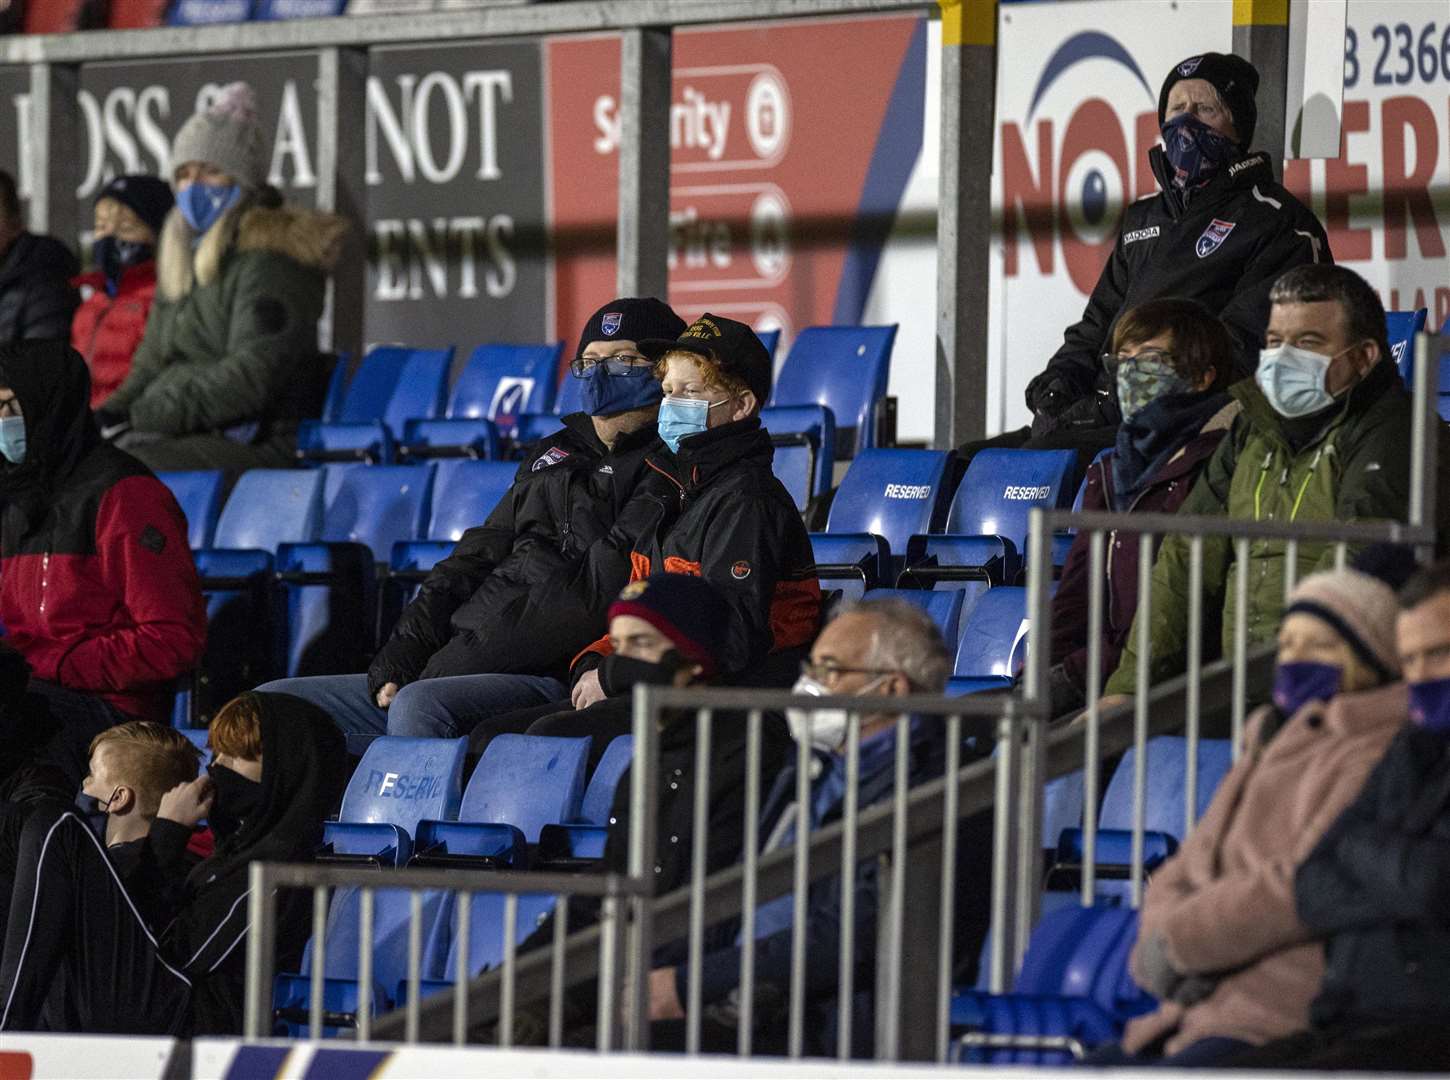 Picture - Ken Macpherson, Inverness. Ross County(1) v Livingston(1). 06.11.20. County supporters at the game.